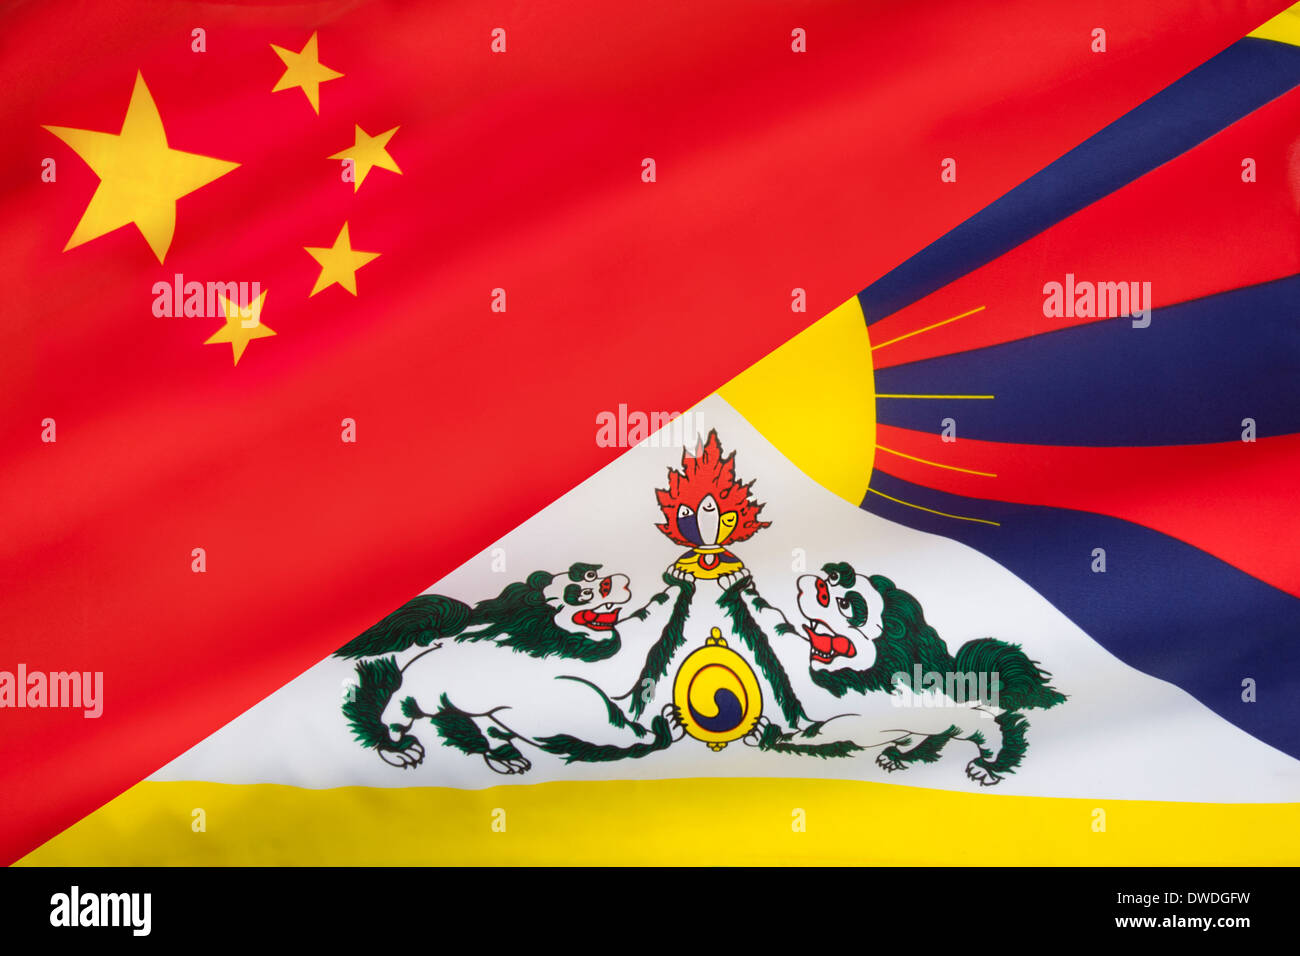 Flag of China mixed with the Free Tibet flag Stock Photo